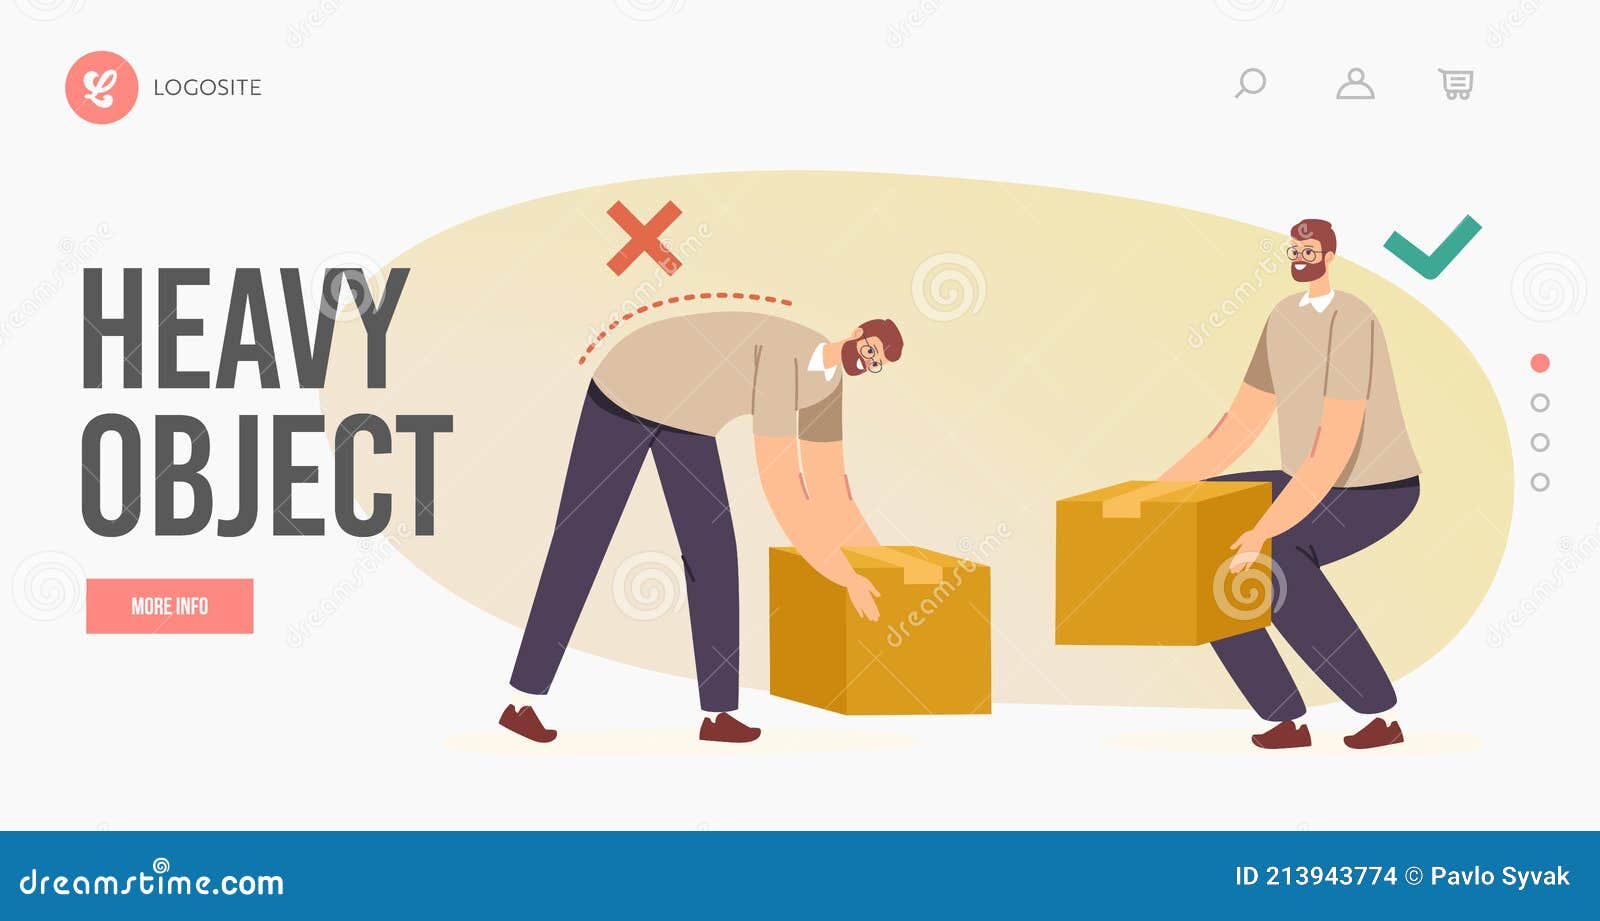 right and wrong manual handling and lifting of heavy objects landing page template. back and spine health